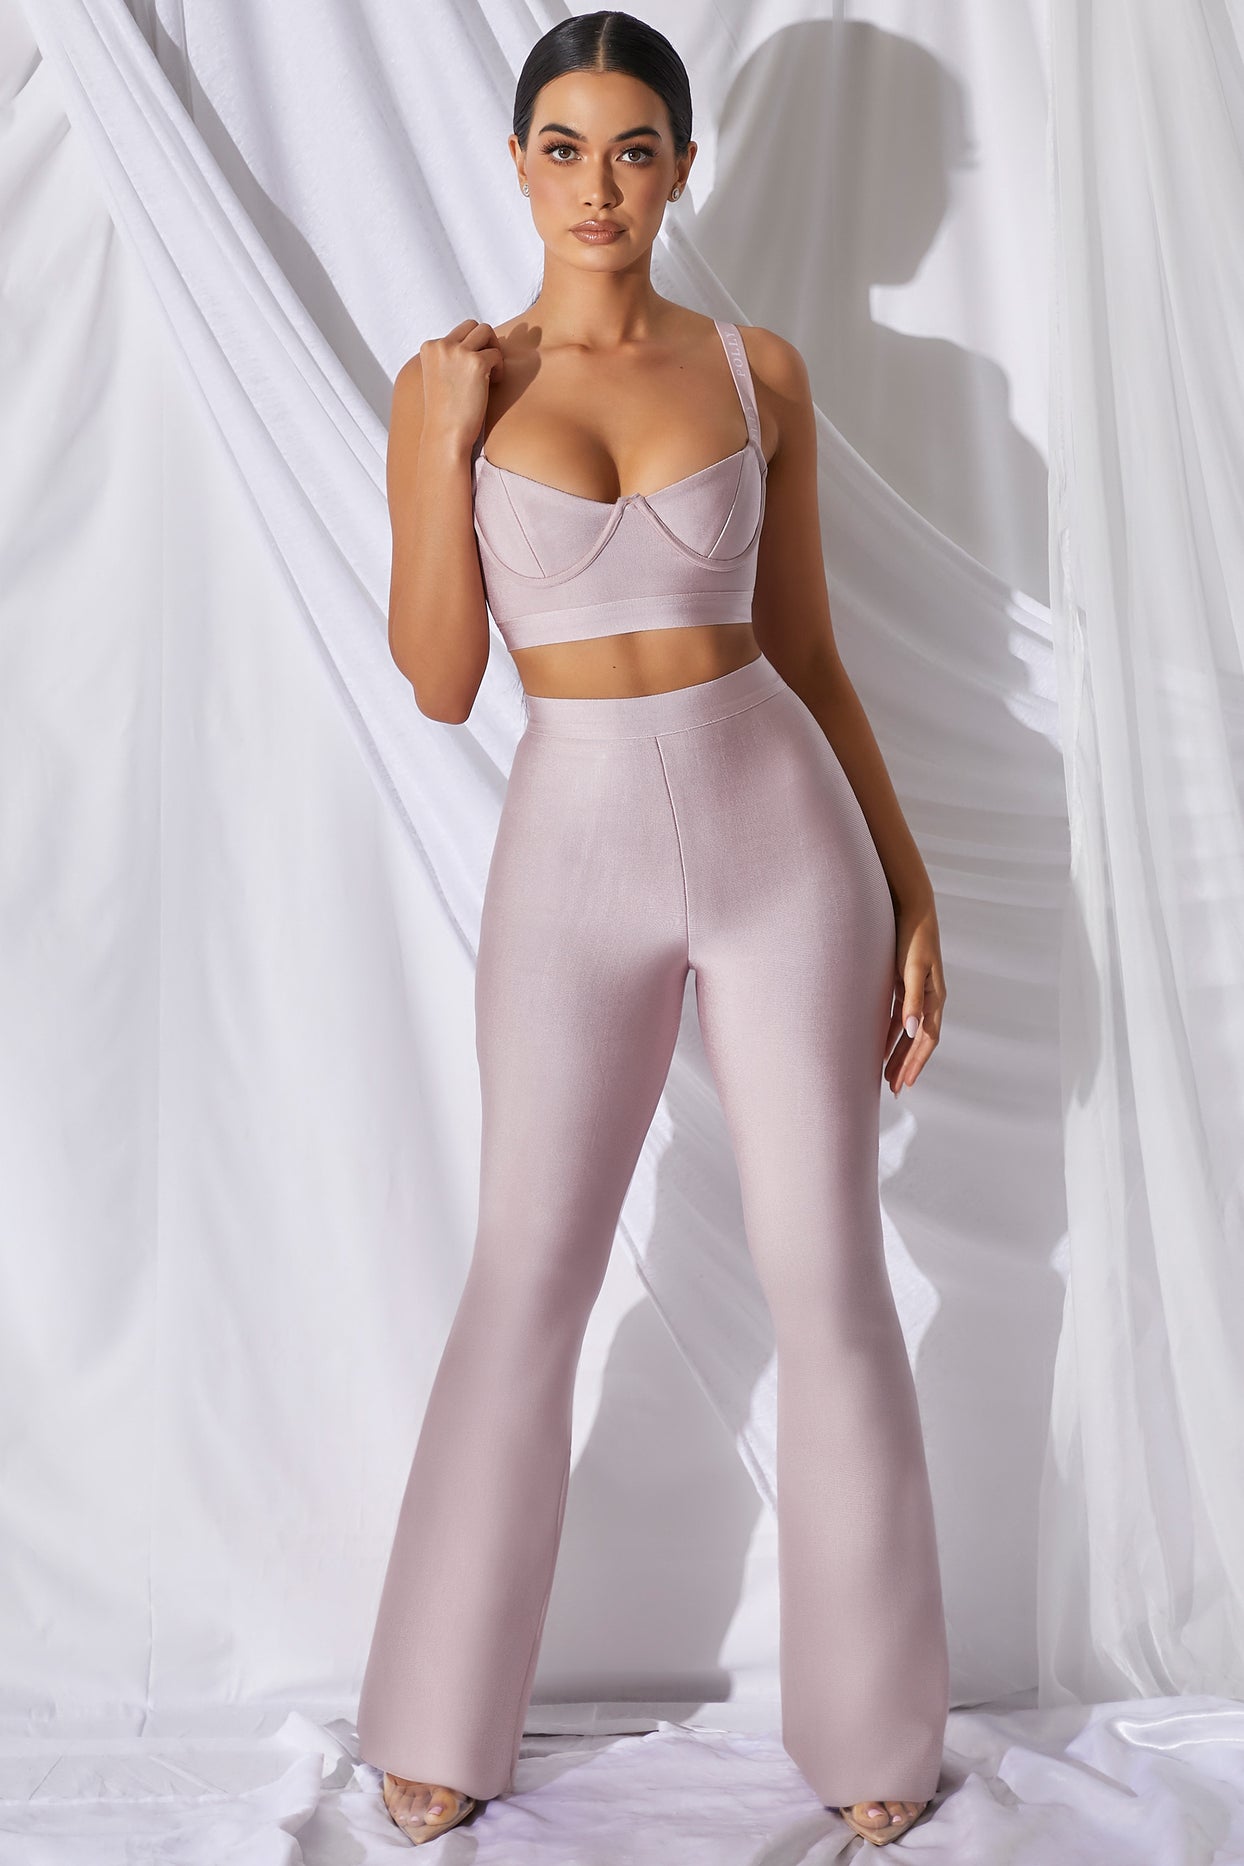 Too Good For You Petite High Waisted Bandage Flare Trousers in Mauve